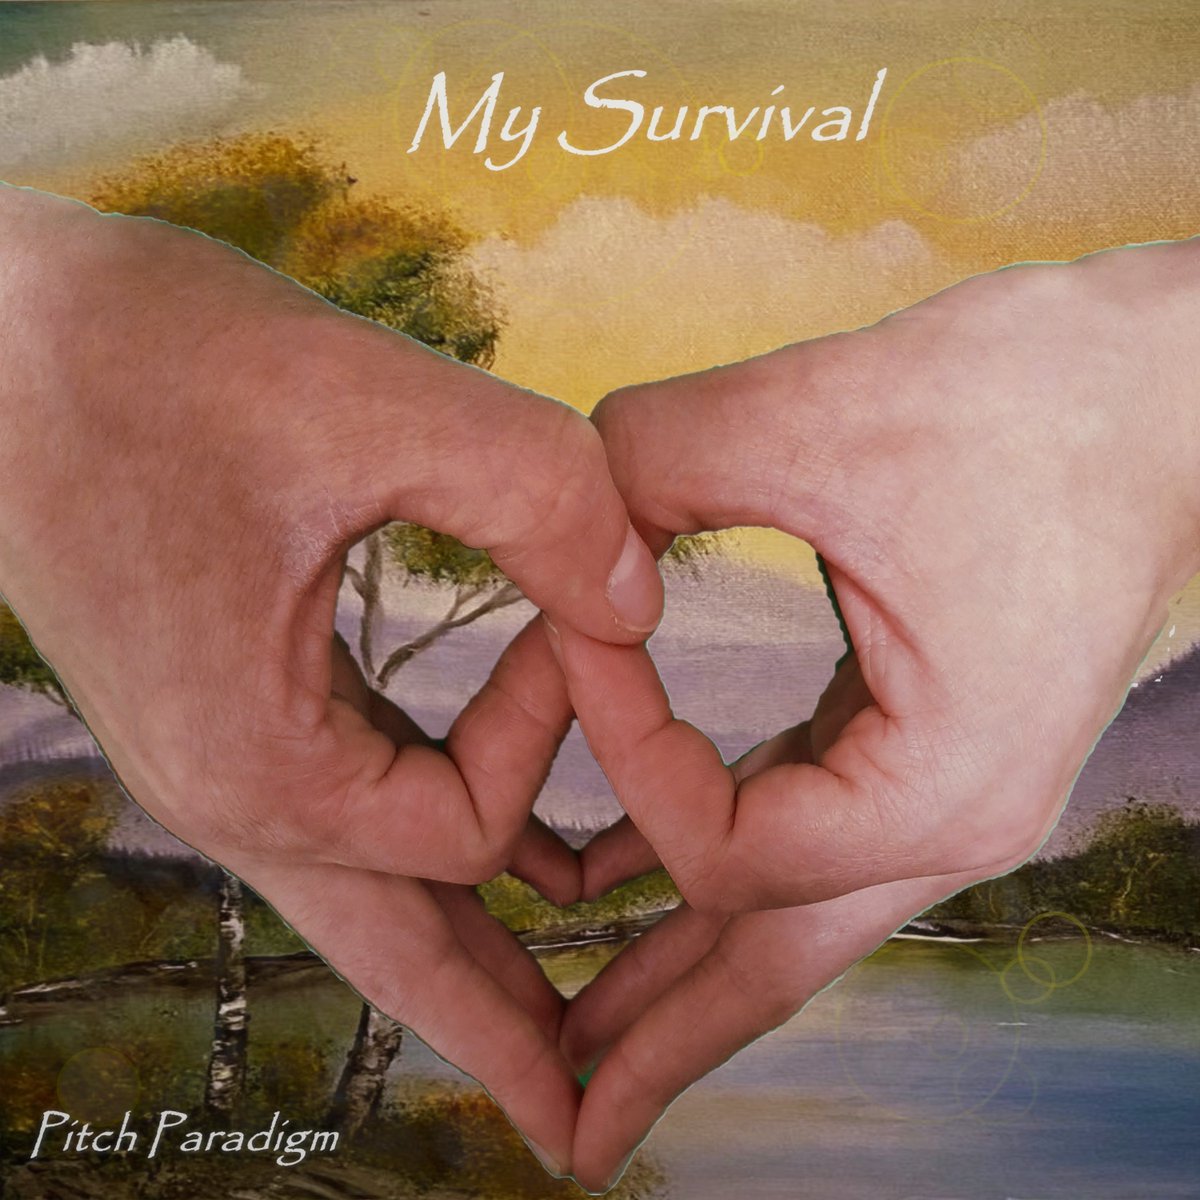 I have my first EP coming out just a week after my album! It is a little bit about my story.

Announcing 'My Survival'
Available: 5/24/24

#Youtube #singer #Spotify #pitchparadigm #pop #applemusic #guitarist #singersongwriter #newep #epic #EP #ep #indiepop #survival #survivor